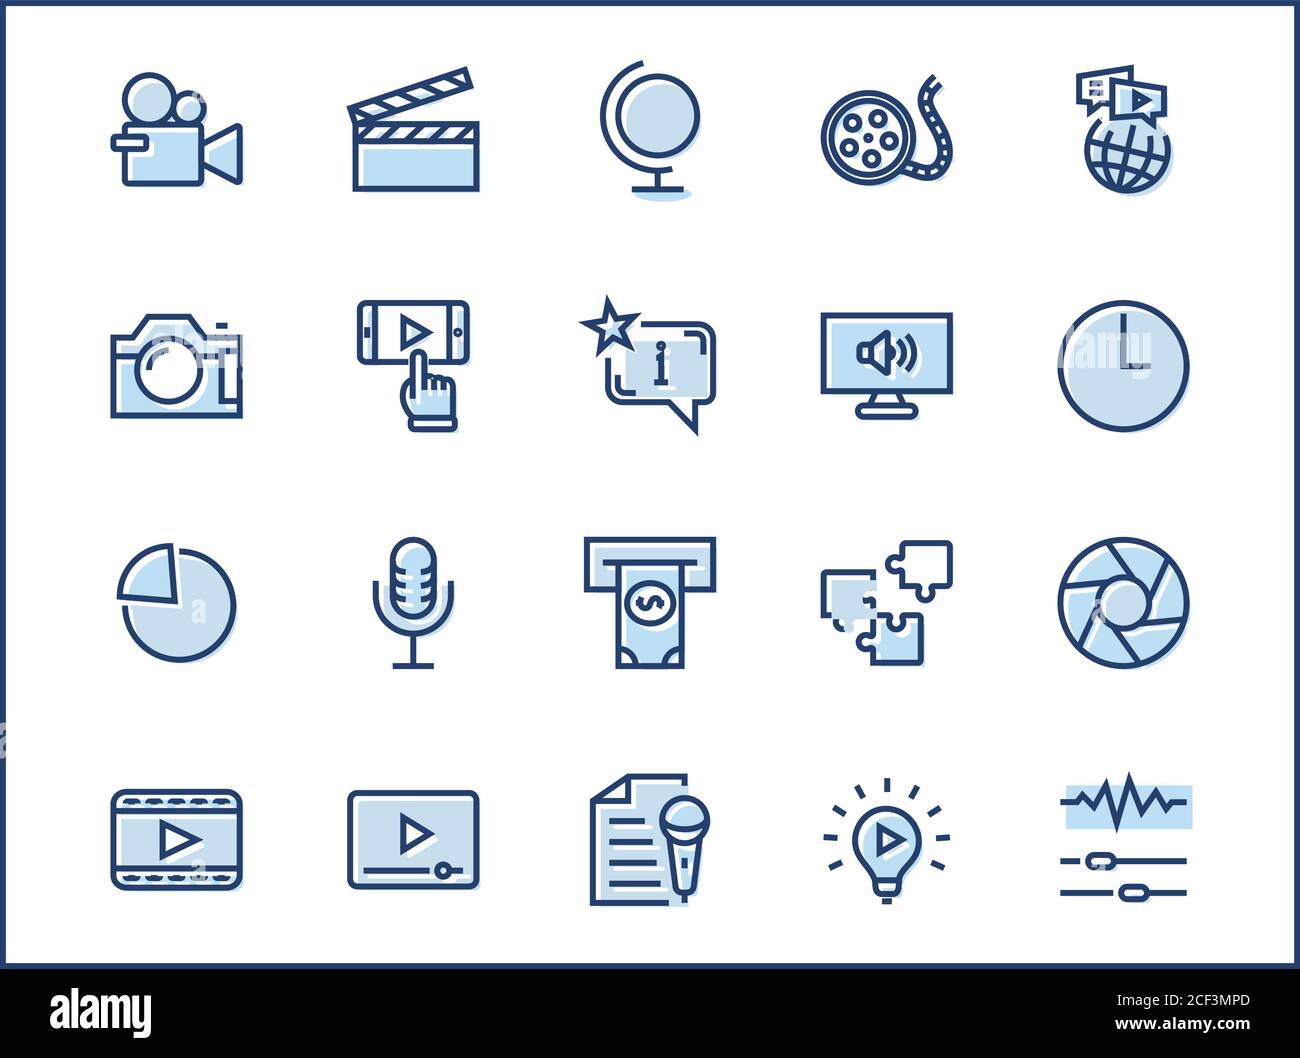 International Film Day Set Line Vector Icons. Contains such Icons as Clapperboard, Camera, Video, Play, Film, Lens, Microphone, Media settings and mor Stock Vector